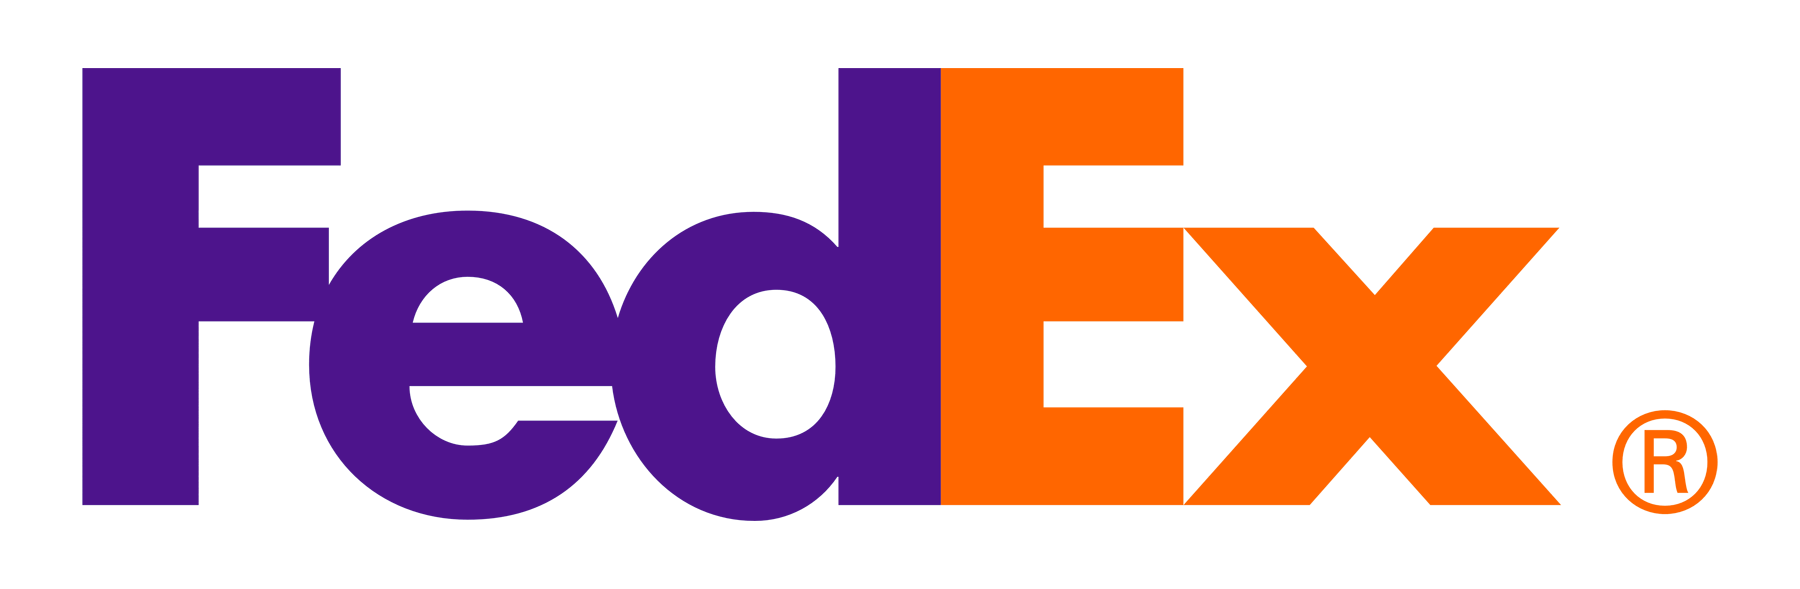 What Color Is the FedEx Logo - FedEx Logo, FedEx Symbol, Meaning, History and Evolution